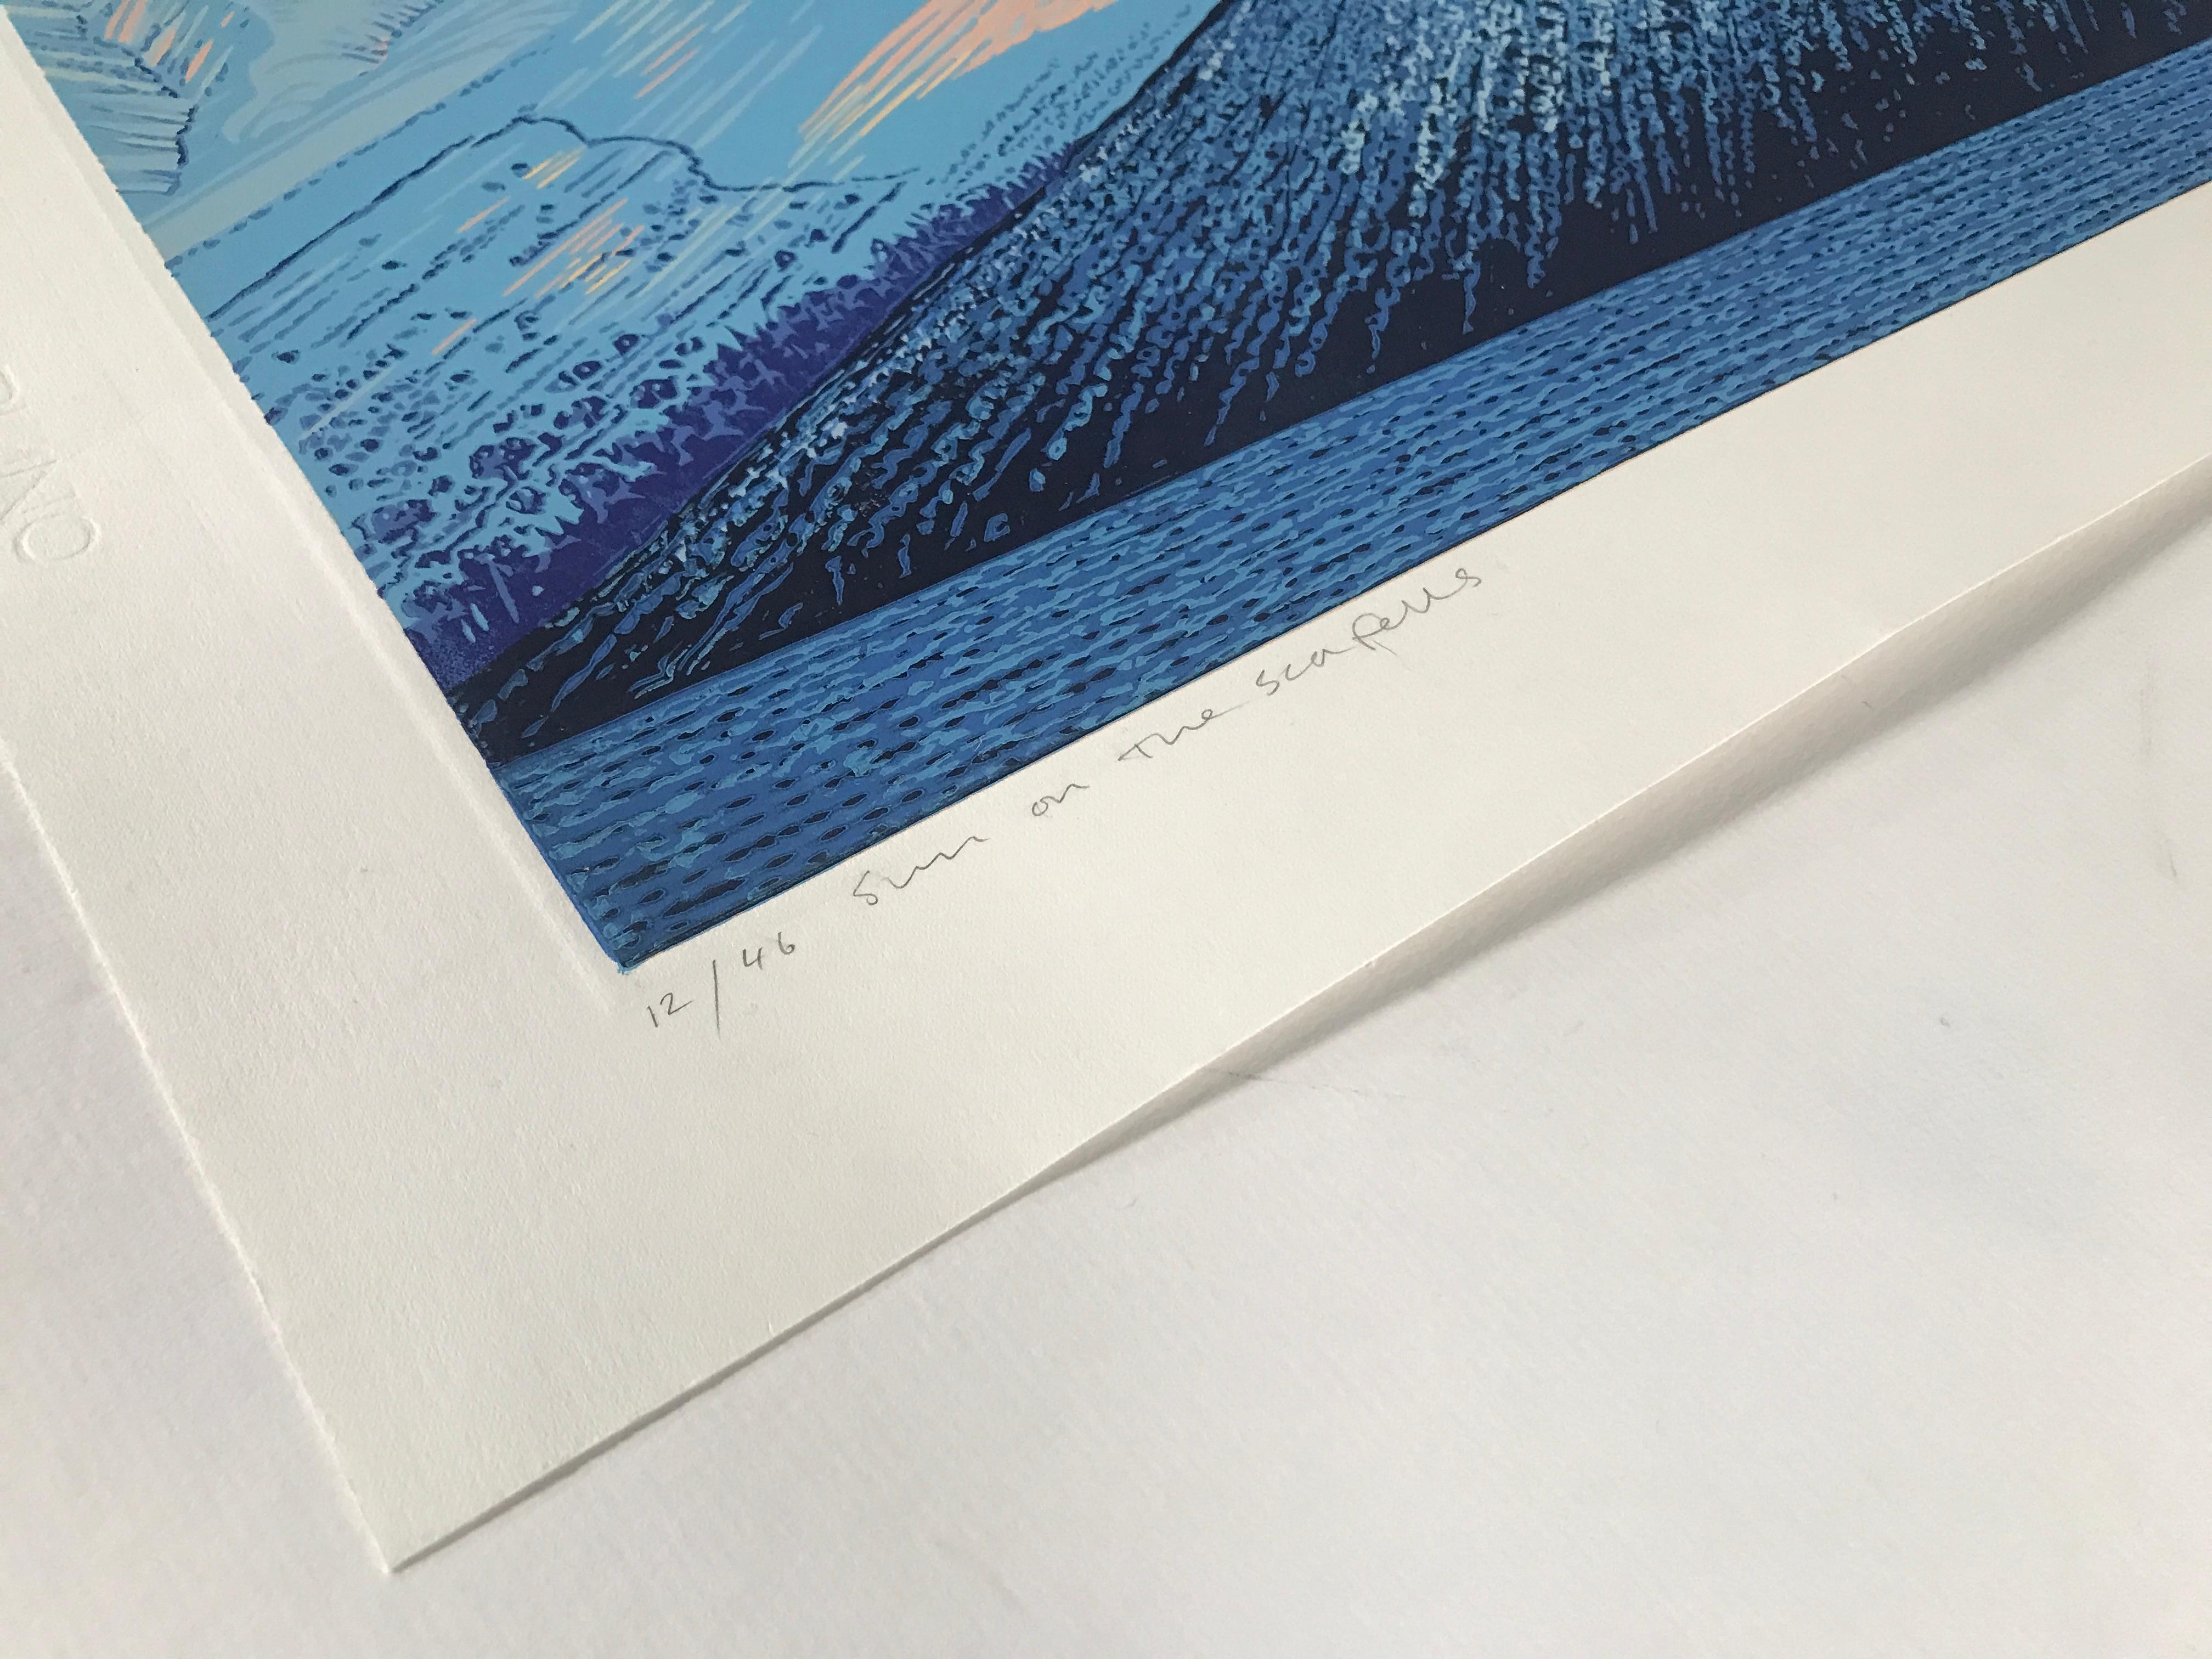 Sun on the Scafells is a limited edition print by Mark A Pearce, inspired by the Sea Fells in the Lake District.

ADDITIONAL INFORMATION:
Sun on the Scafells by Mark A Pearce
Limited Edition Linoprint
Edition of 46
Complete size of unframed work: 50